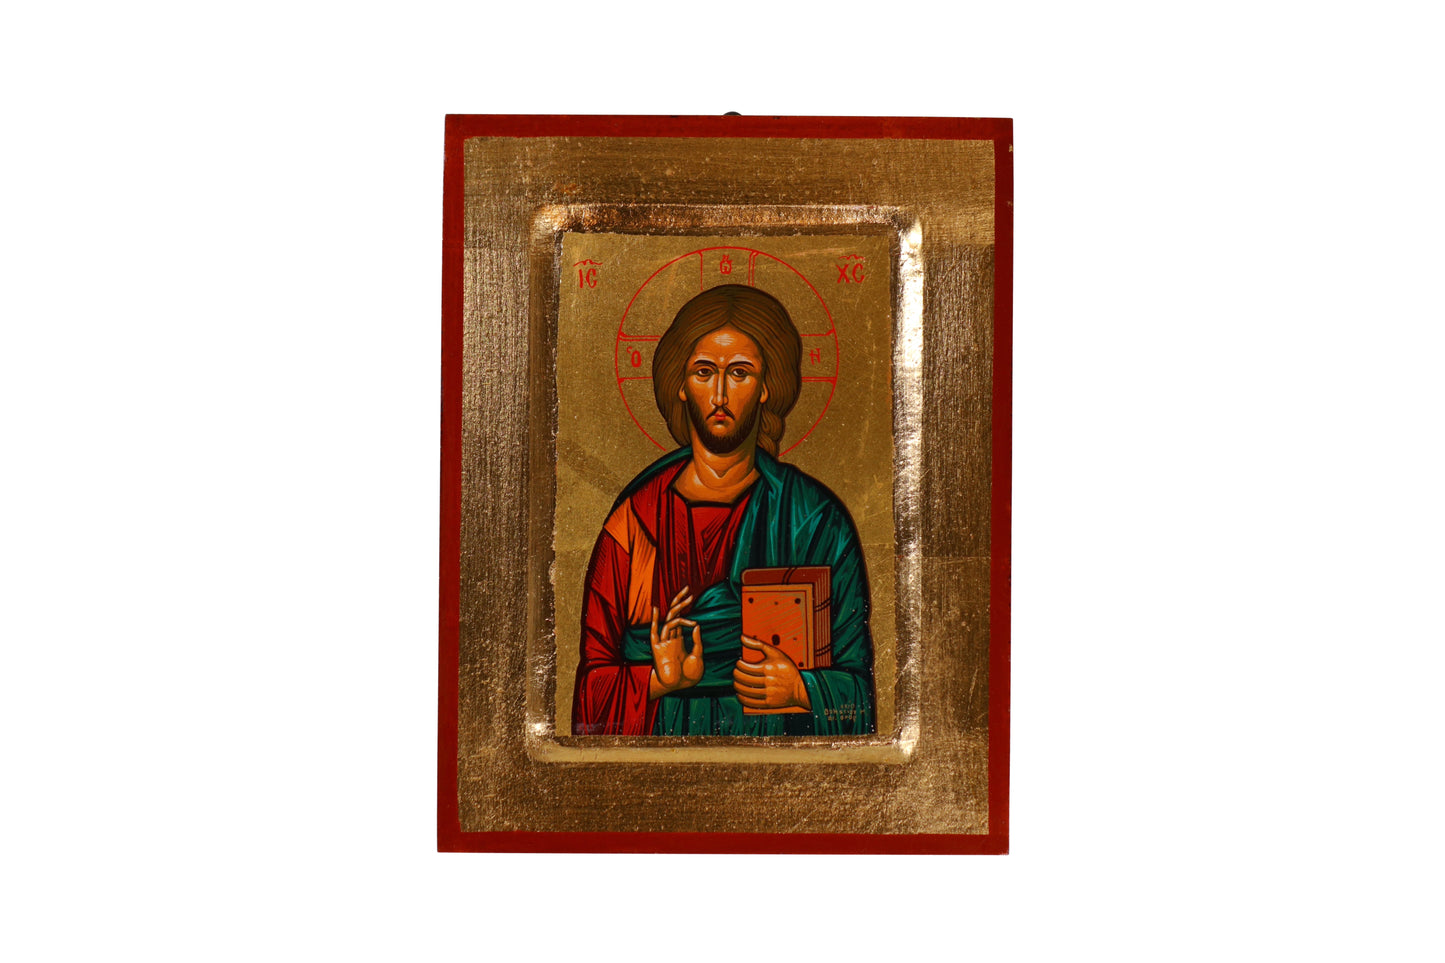 An Eastern Orthodox icon of Jesus Christ centered within a red frame, featuring Christ with a solemn expression, haloed head, blessing with His right hand, and holding an open book in His left. The halo bears the Greek letters "IC XC," and He is robed in red and green with golden highlights, set against a golden background.